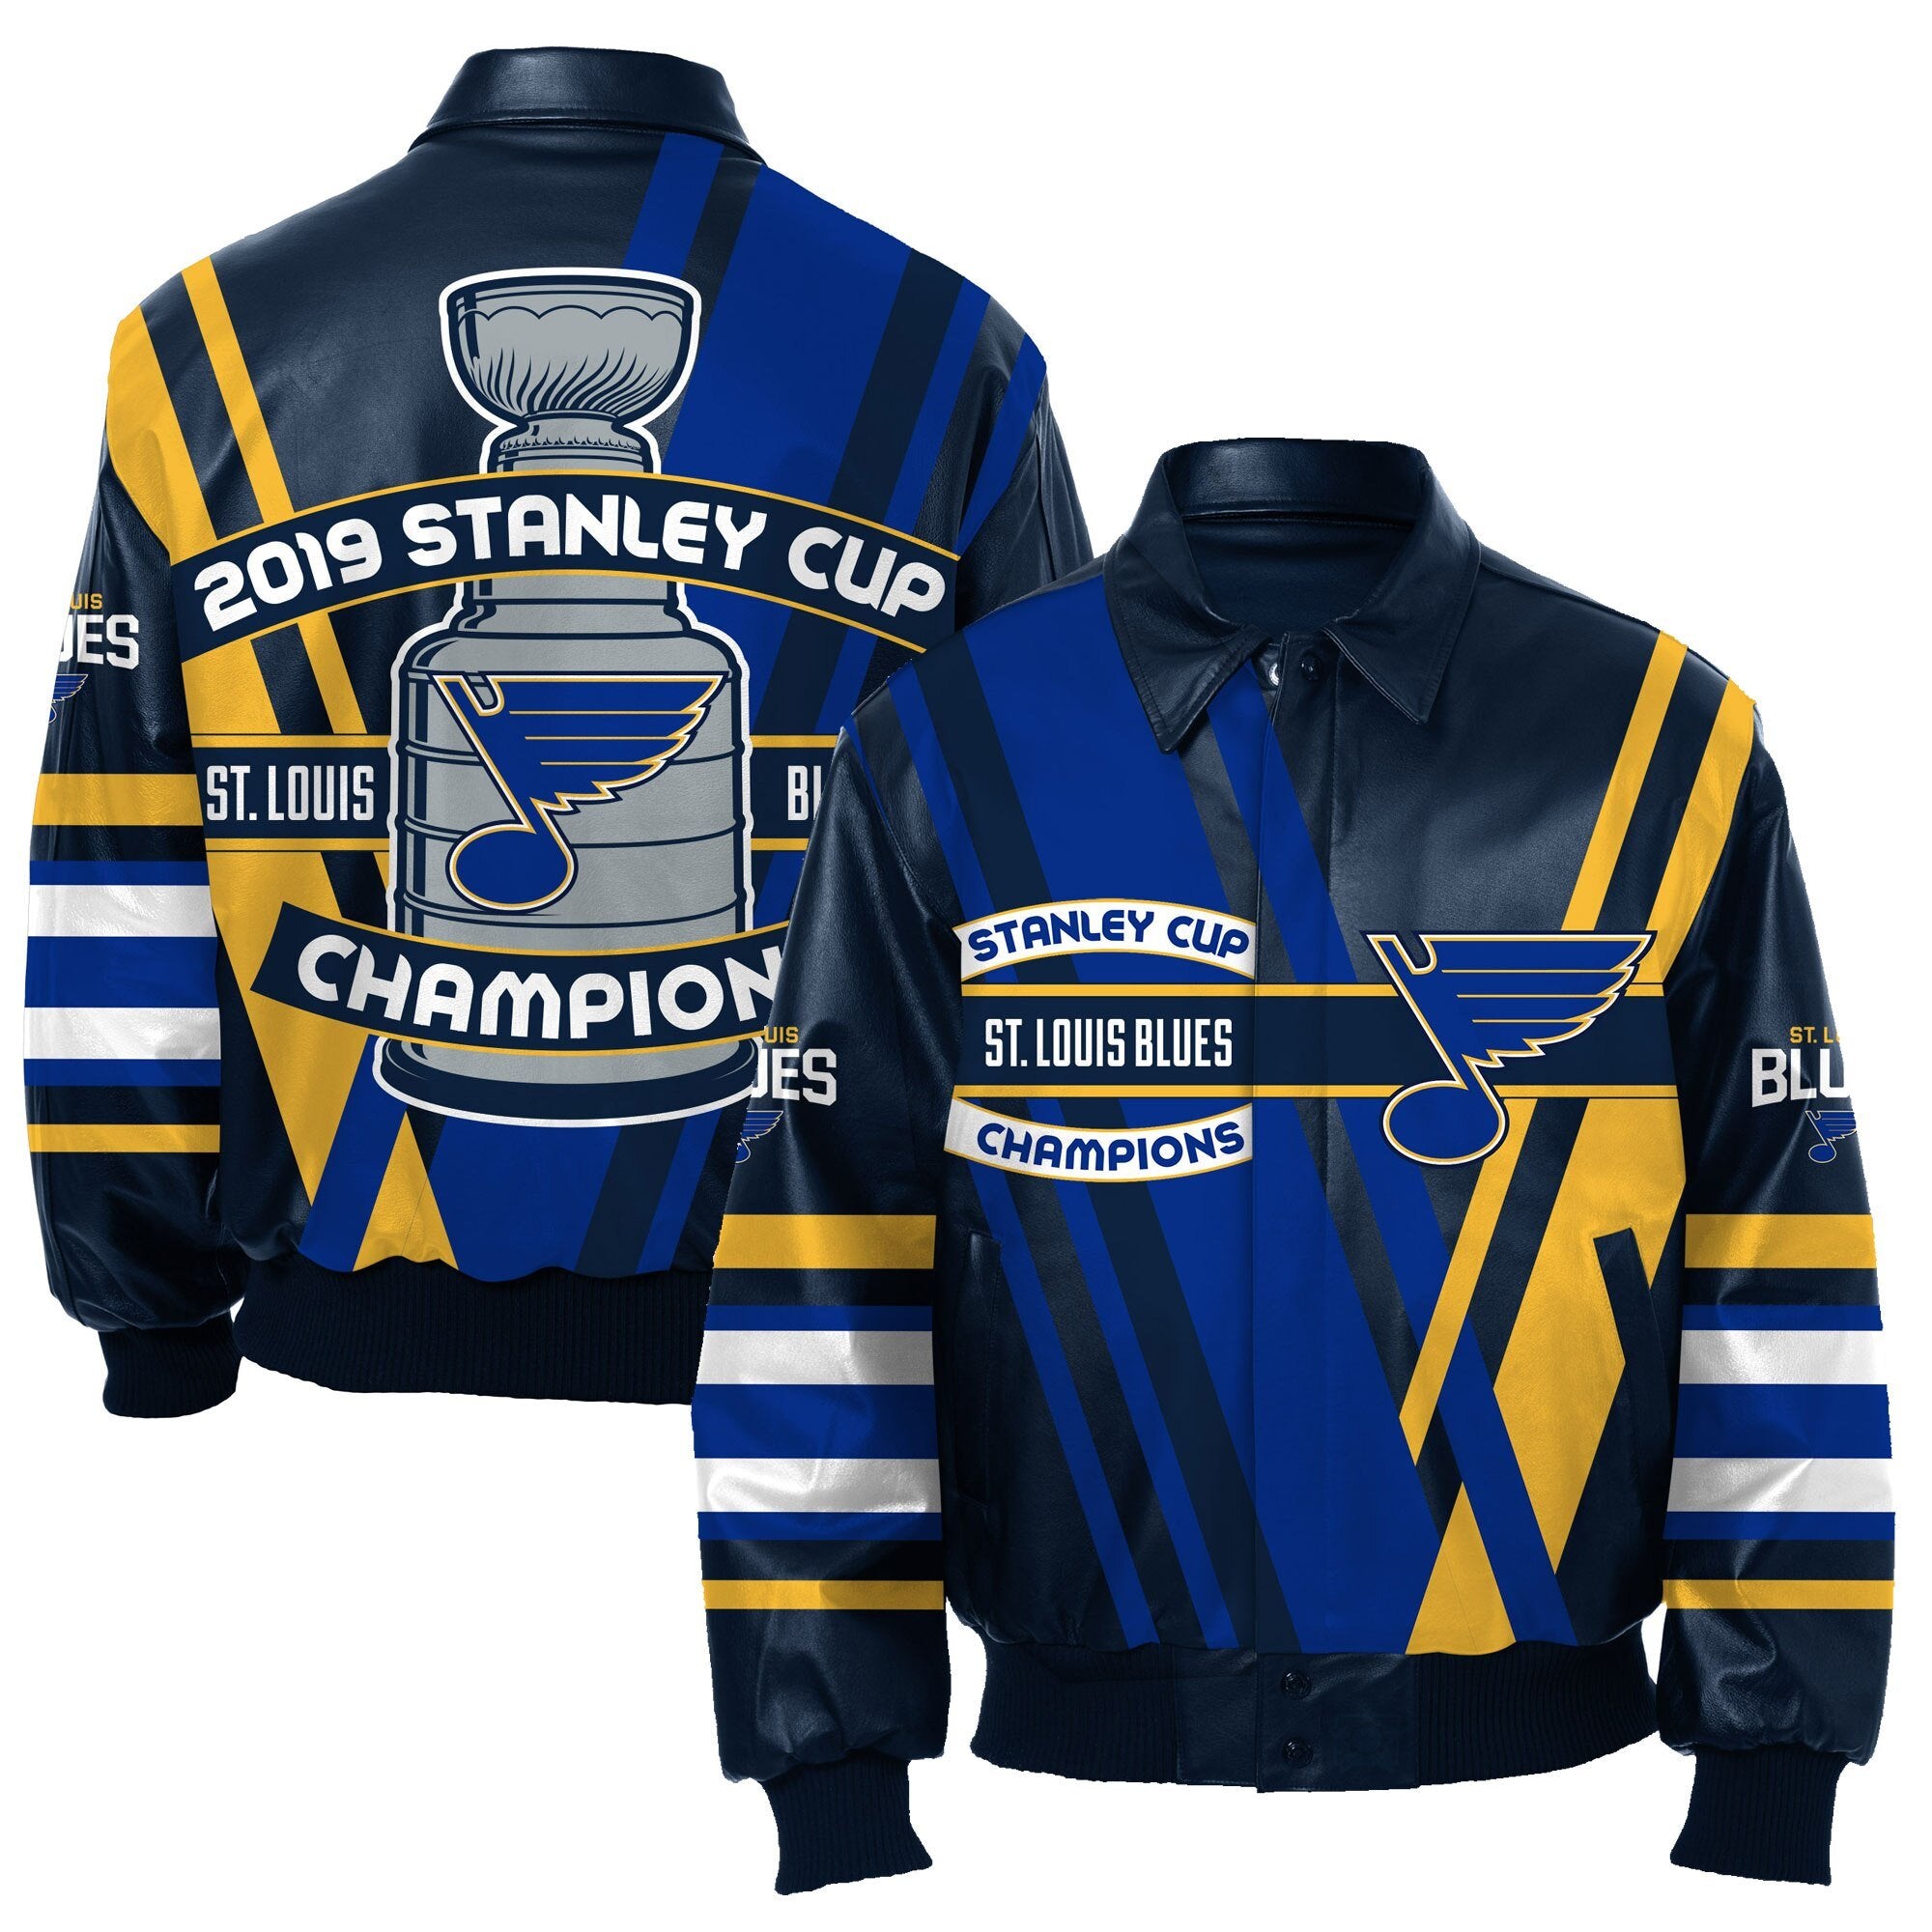 J.H. Sports Jackets St. Louis Blues JH Design 2019 Stanley Cup Champions Nappa Leather Jacket - Navy 3X-Large